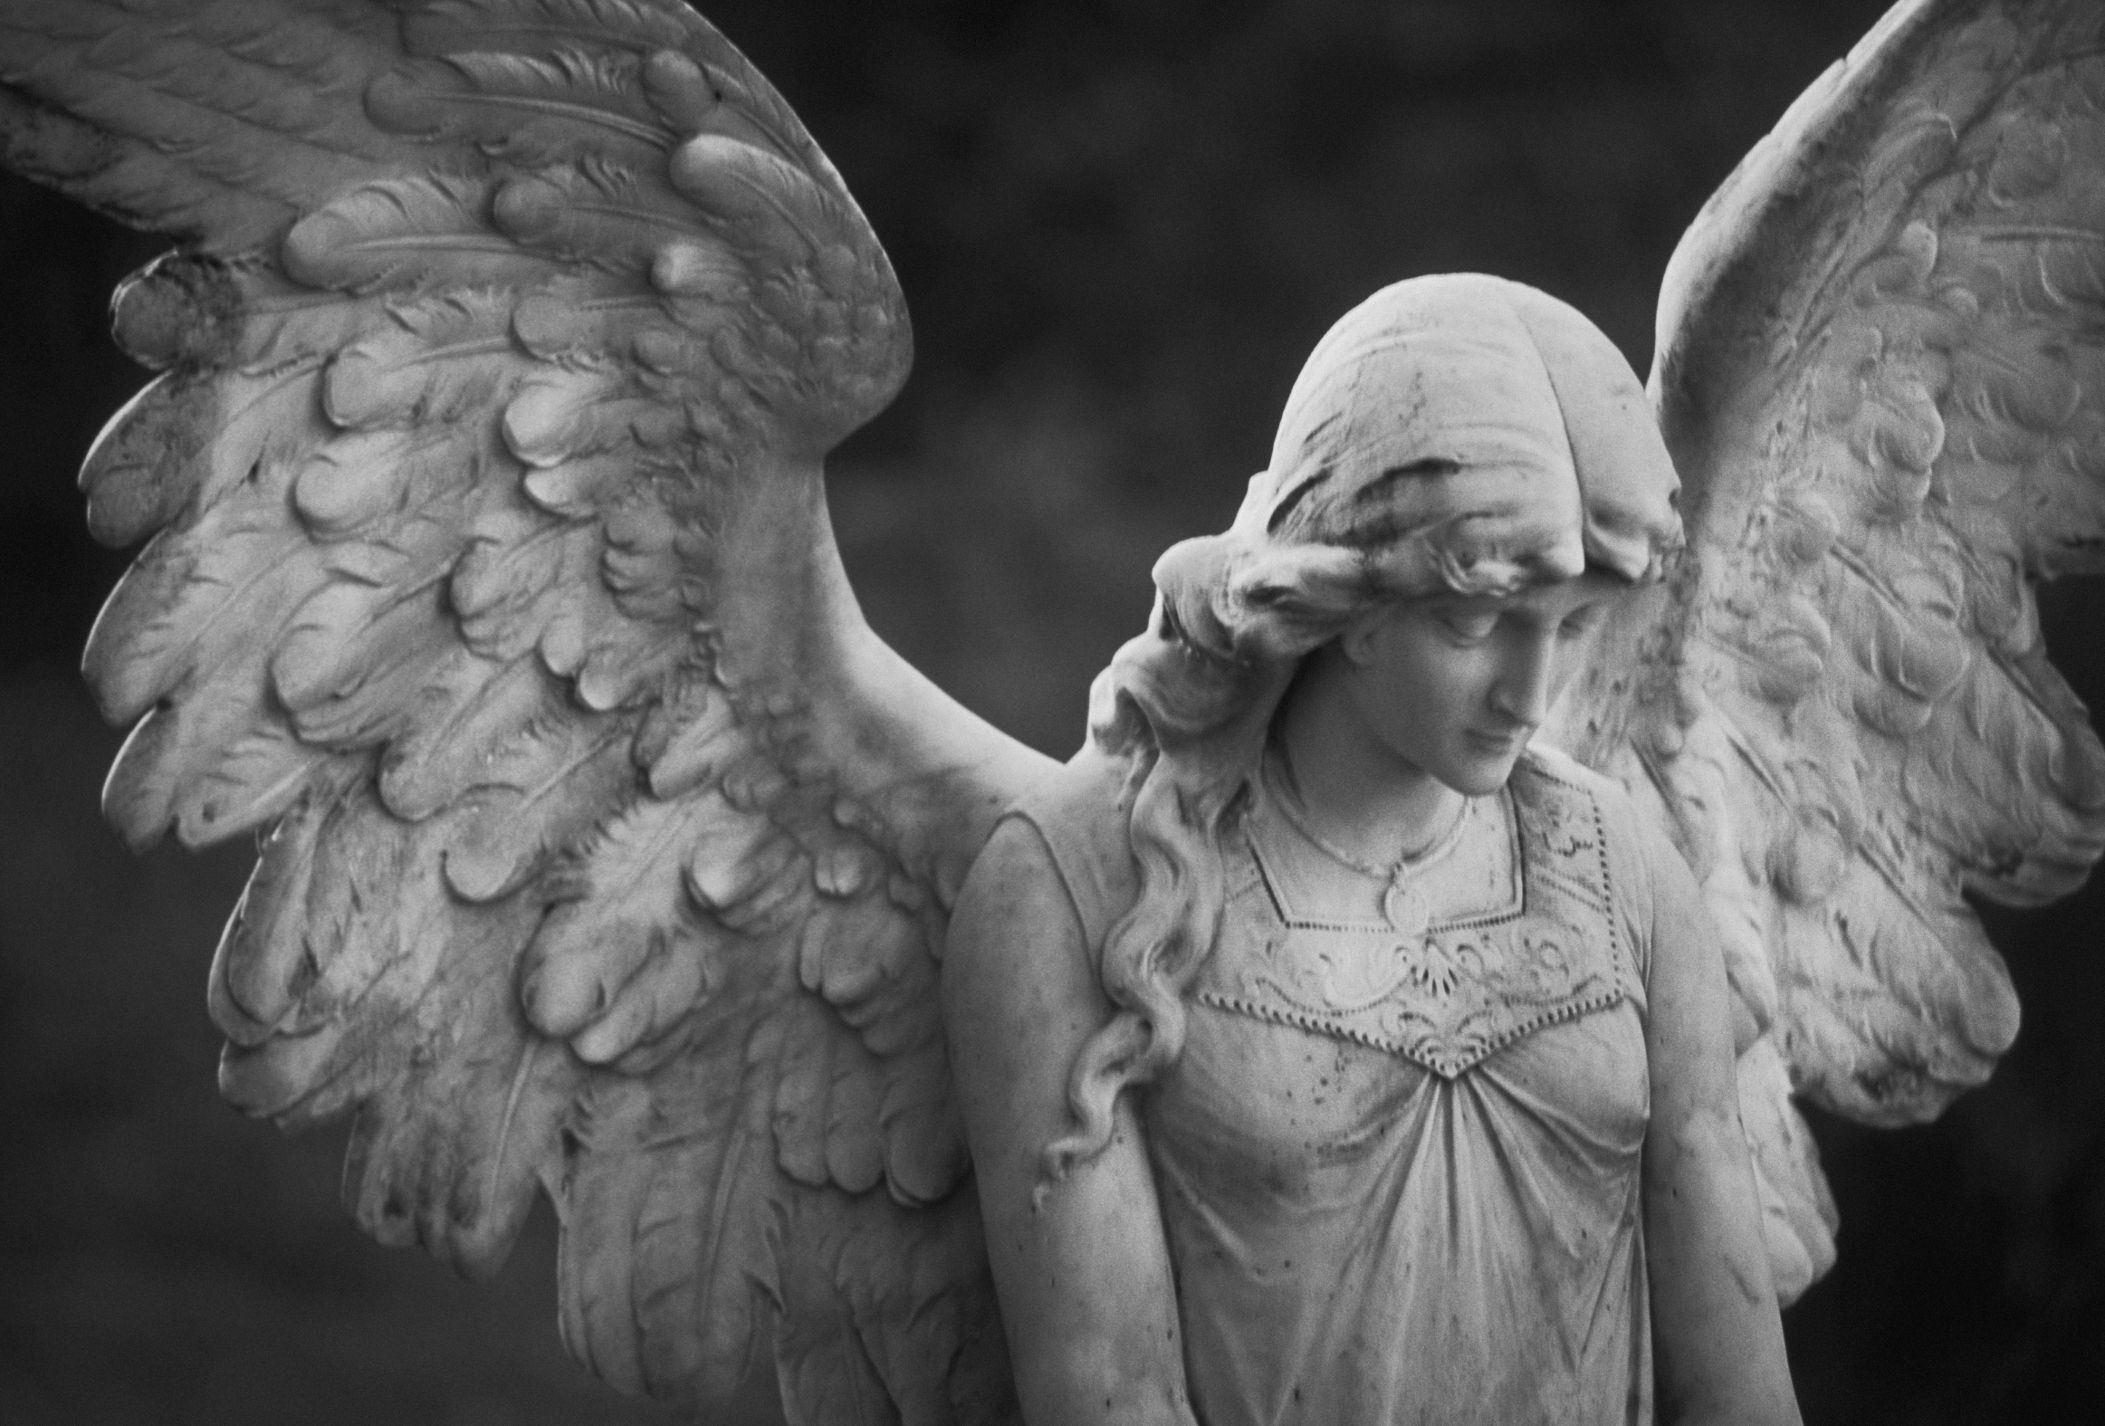 How To Communicate With Your Guardian Angels As A Catholic